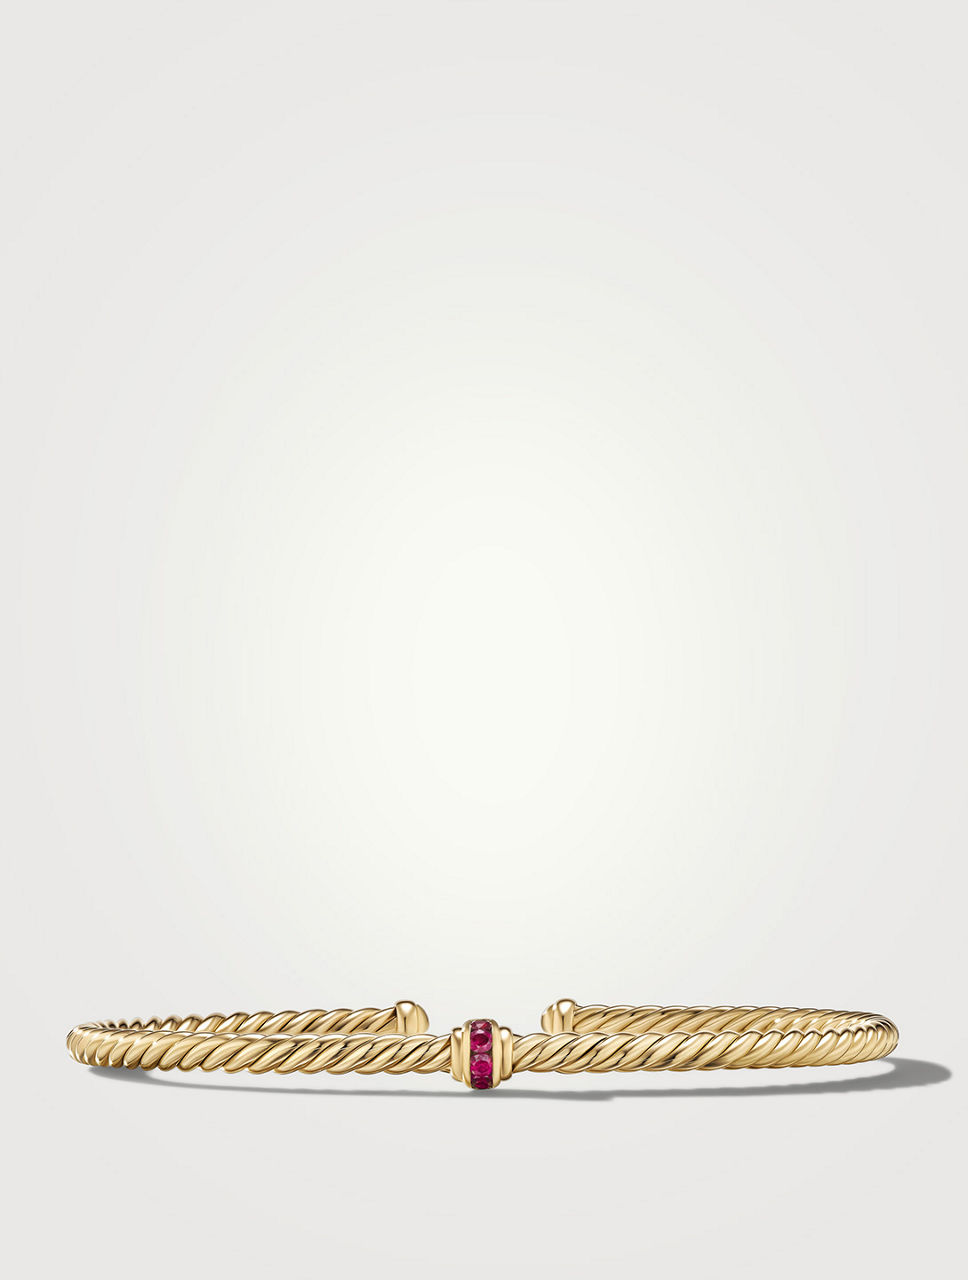 Cable Classics Center Station Bracelet 18k Yellow Gold With Pavé Rubies